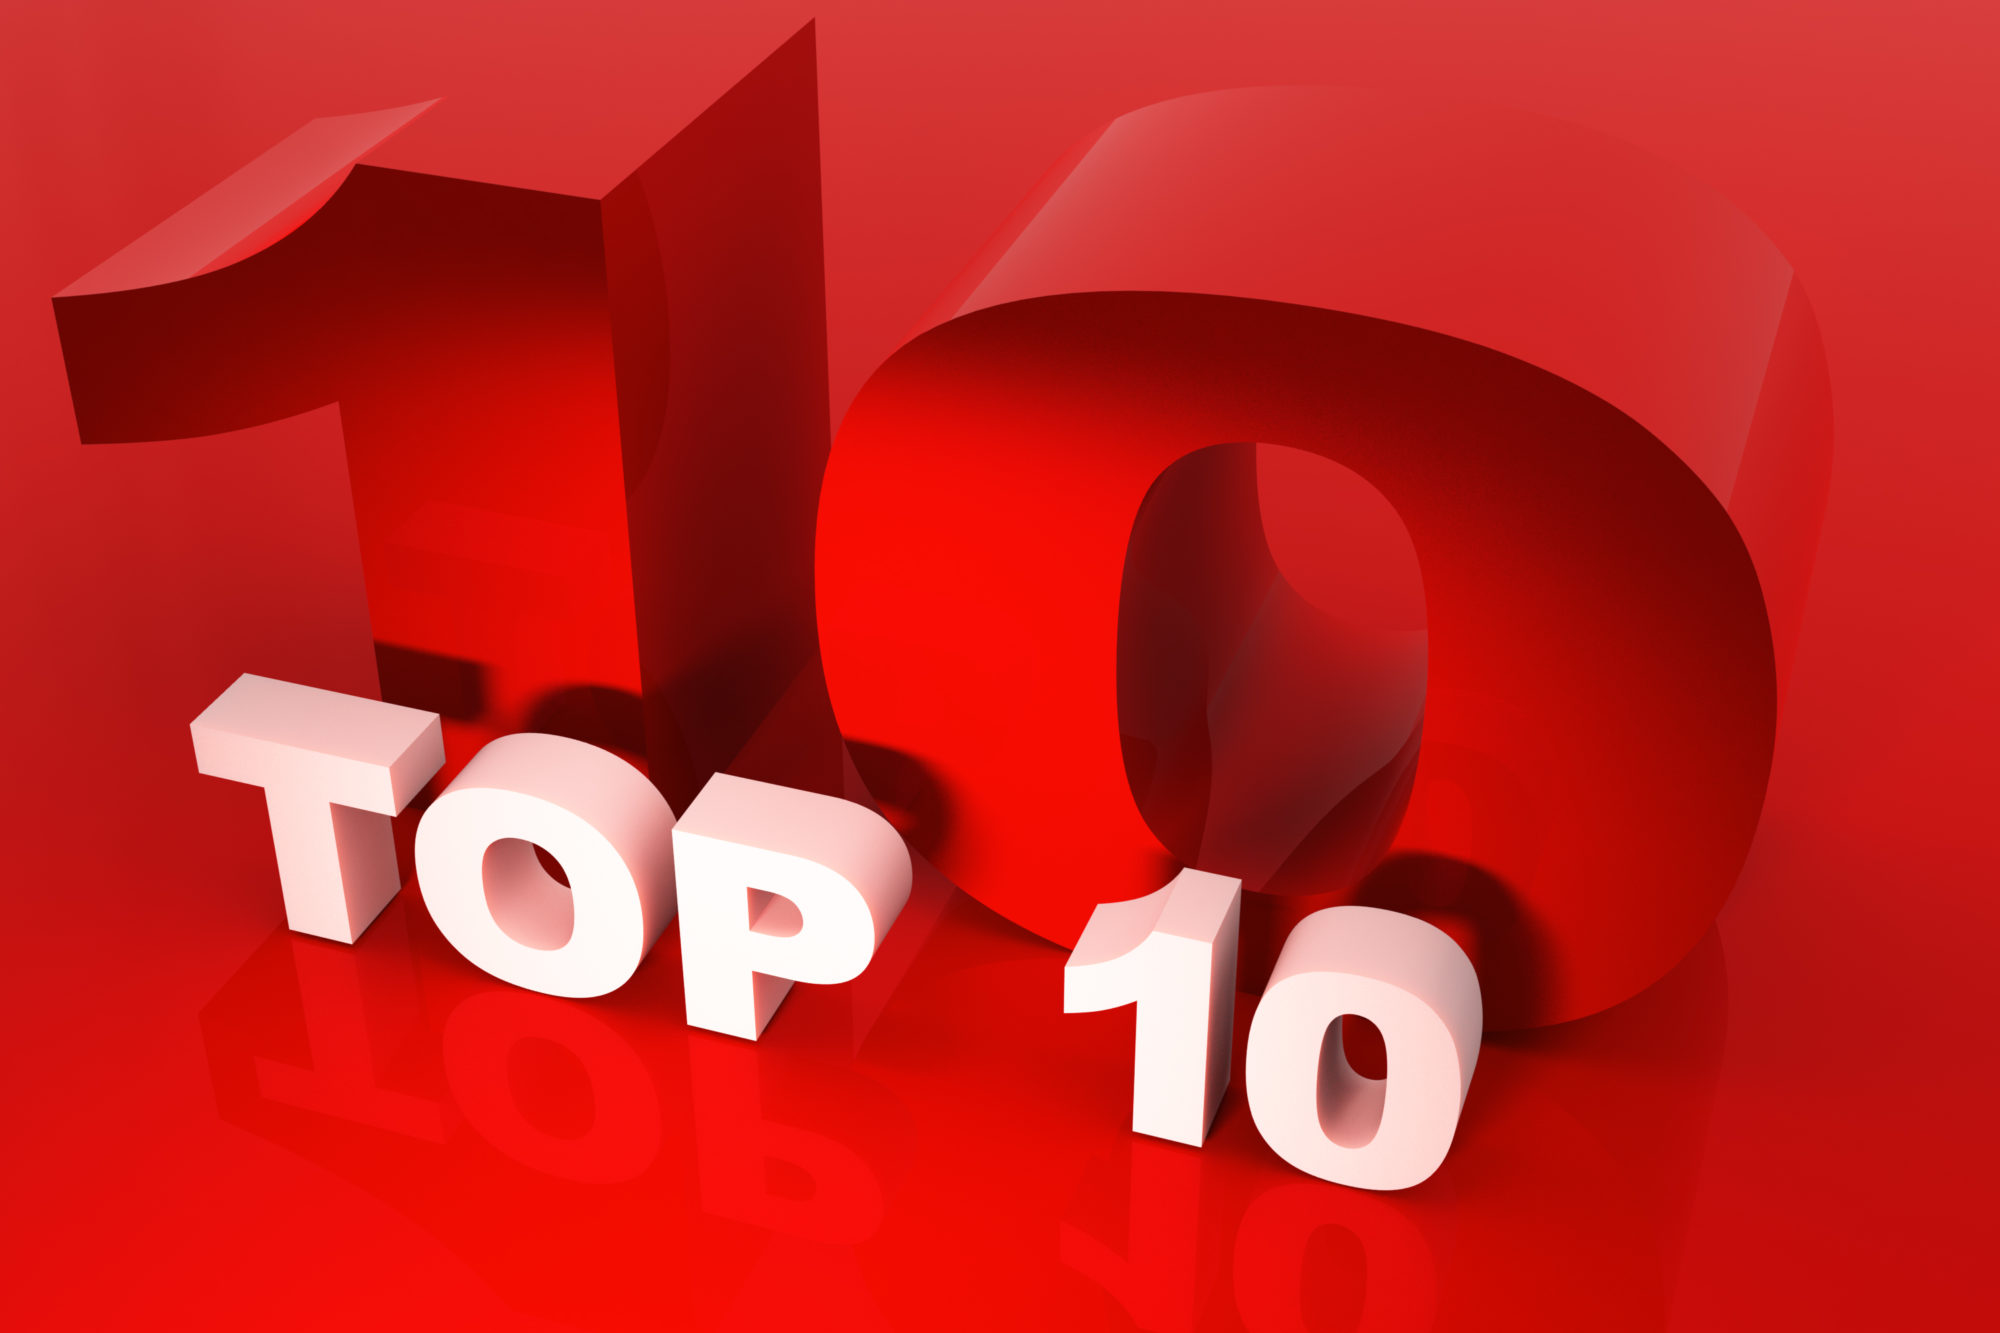 The Top 10 Imaging Industry Stories for November 2018